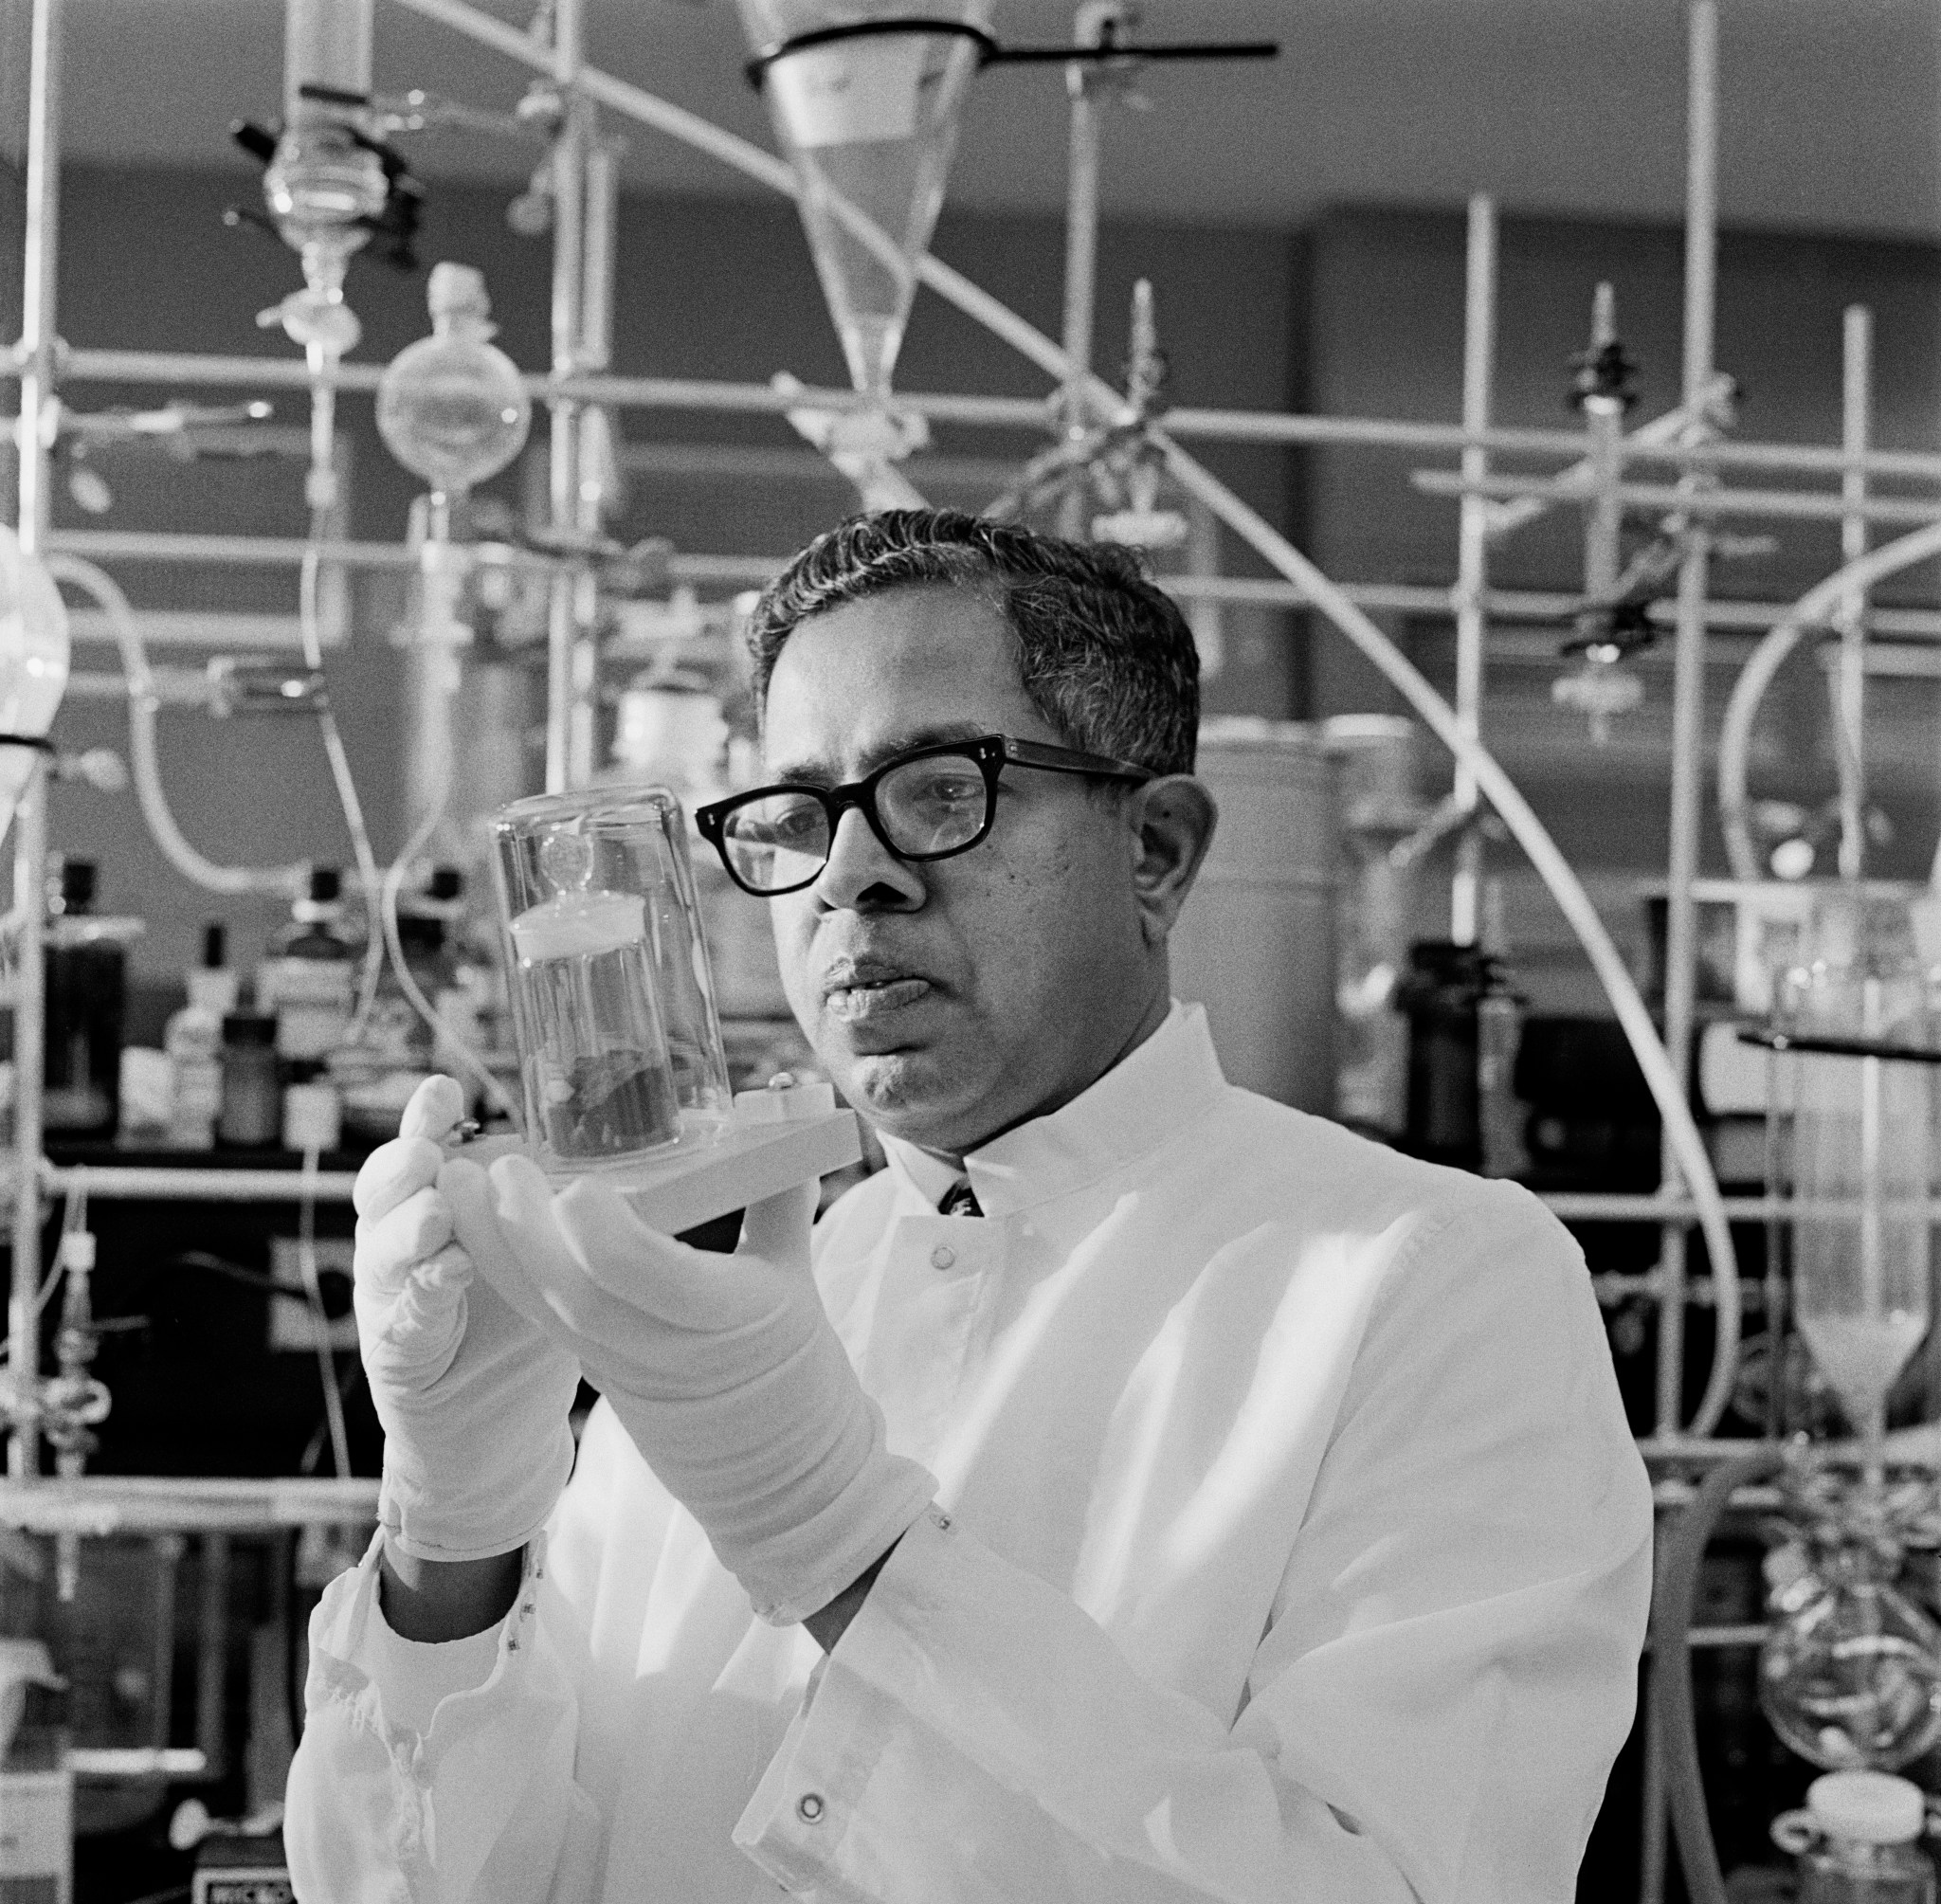 Photograph of Dr. Cyril A. Ponnamperuma in the Lunar Chemical Laboratory at Ames